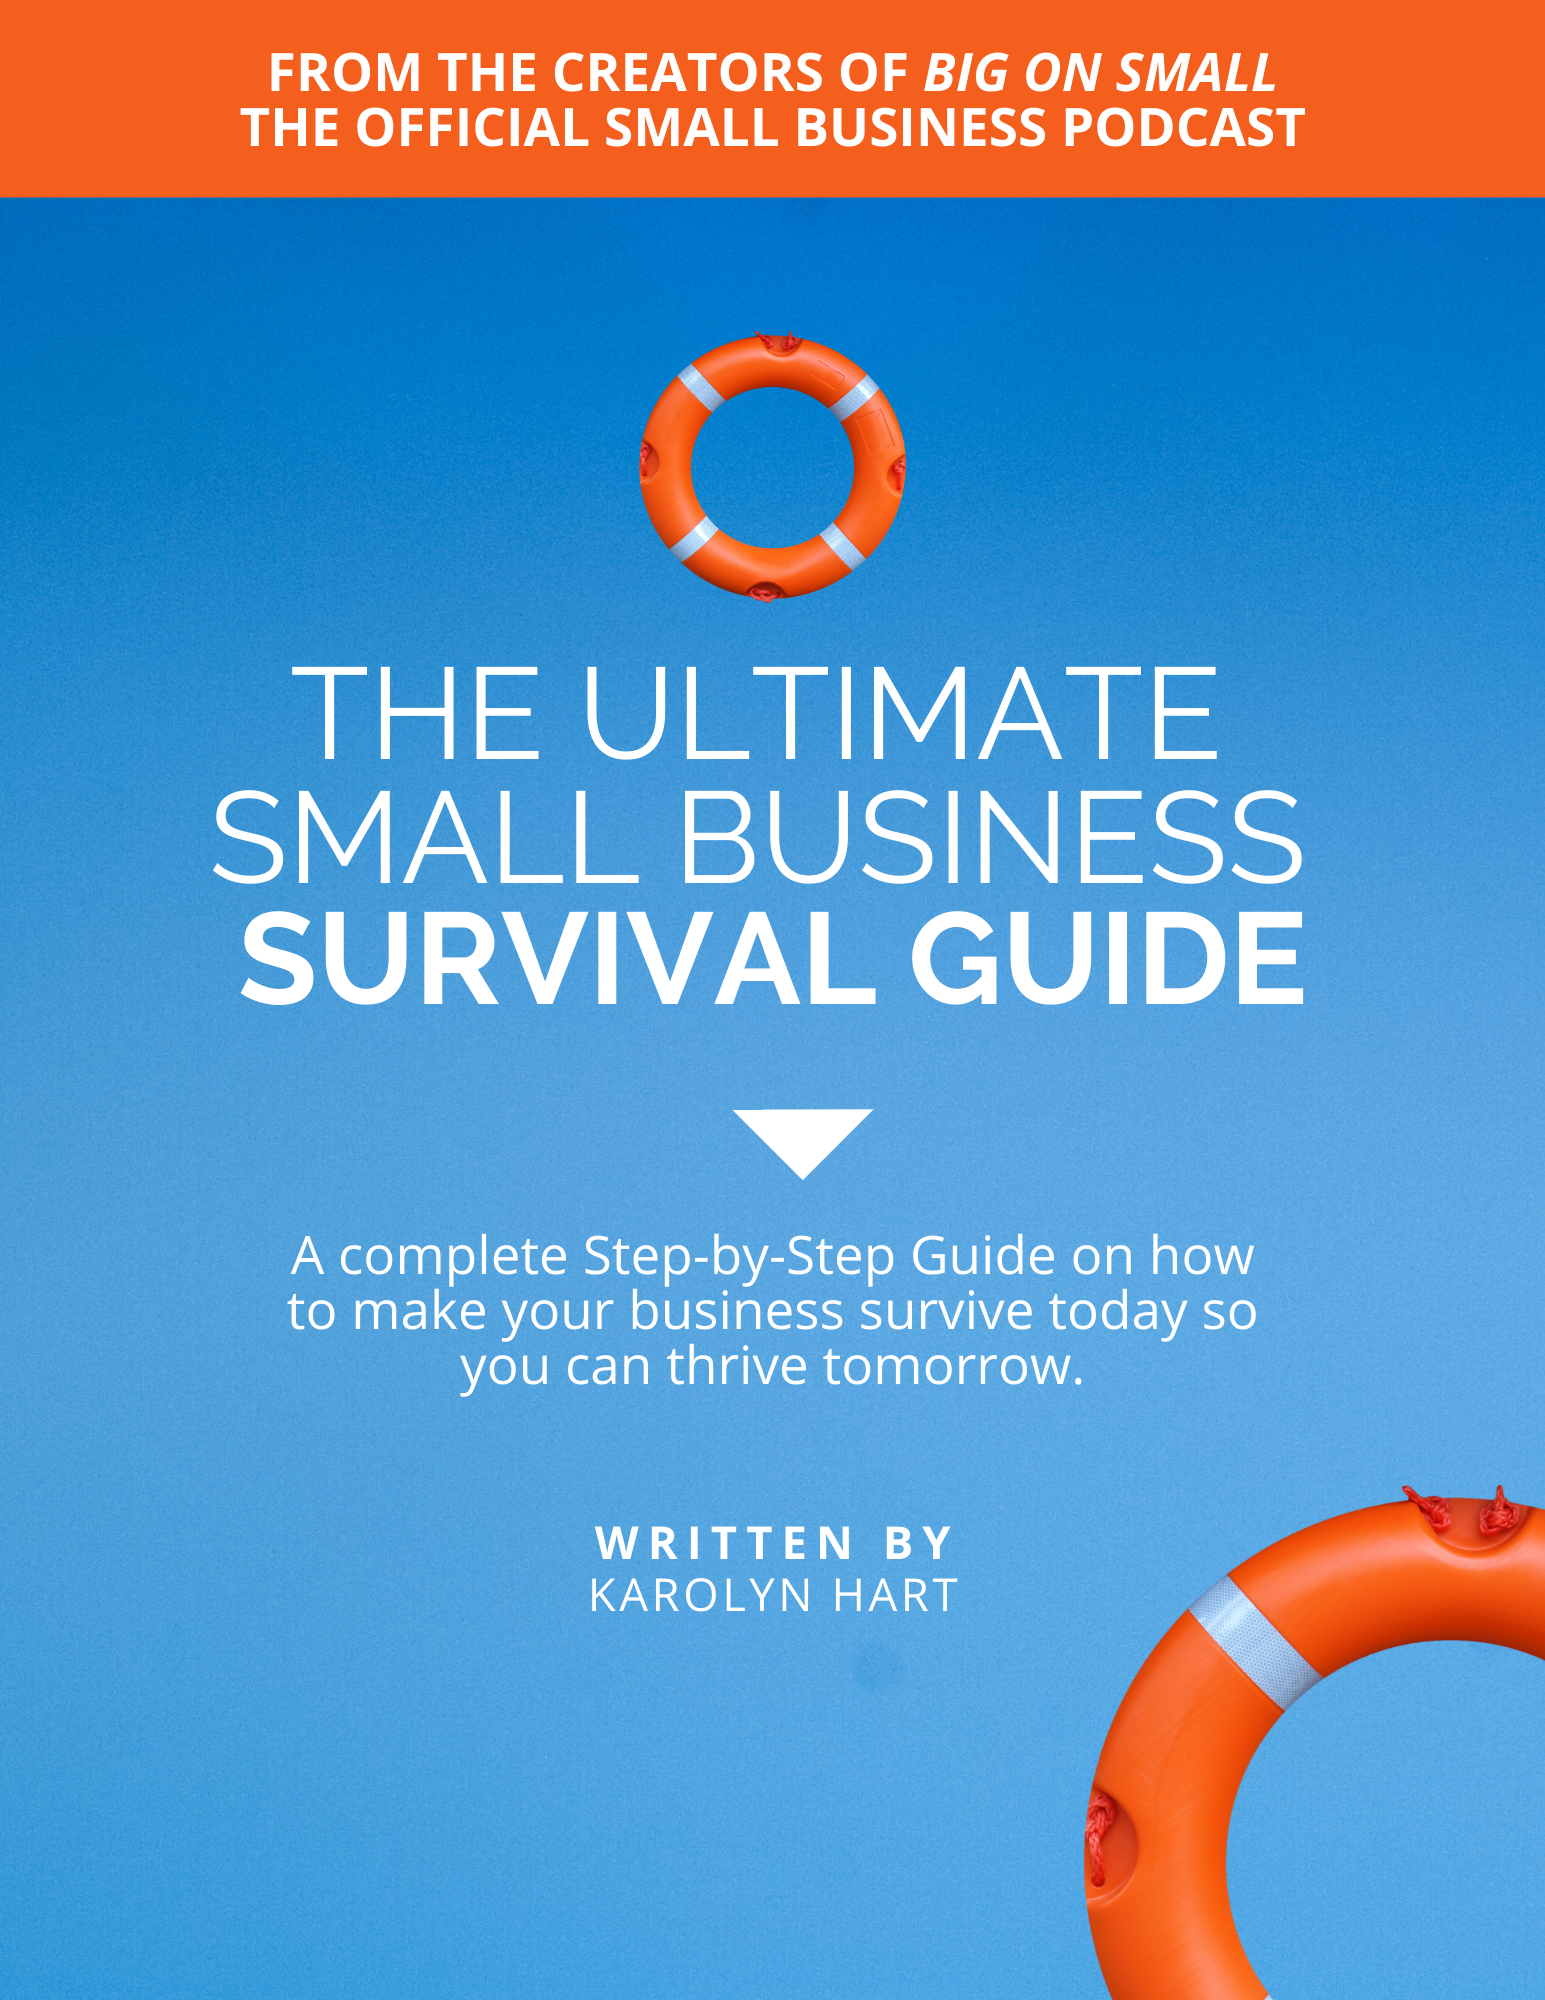 The Ultimate Small Business Survival Guide